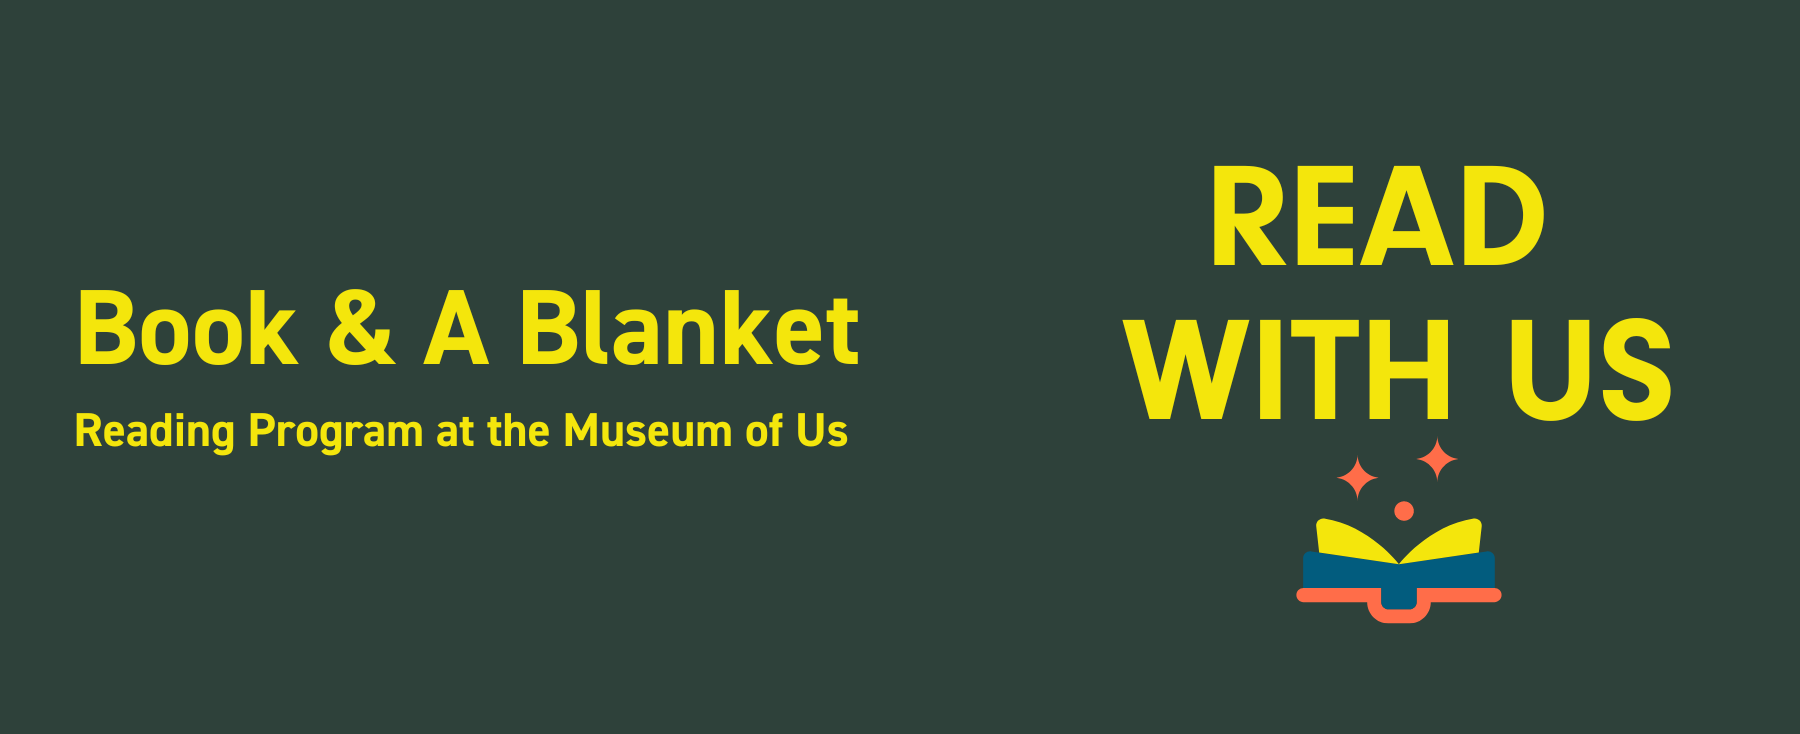 A graphic image on a dark green background with yellow text that says Book & A Blanket Reading Program at the Museum of Us READ WITH US